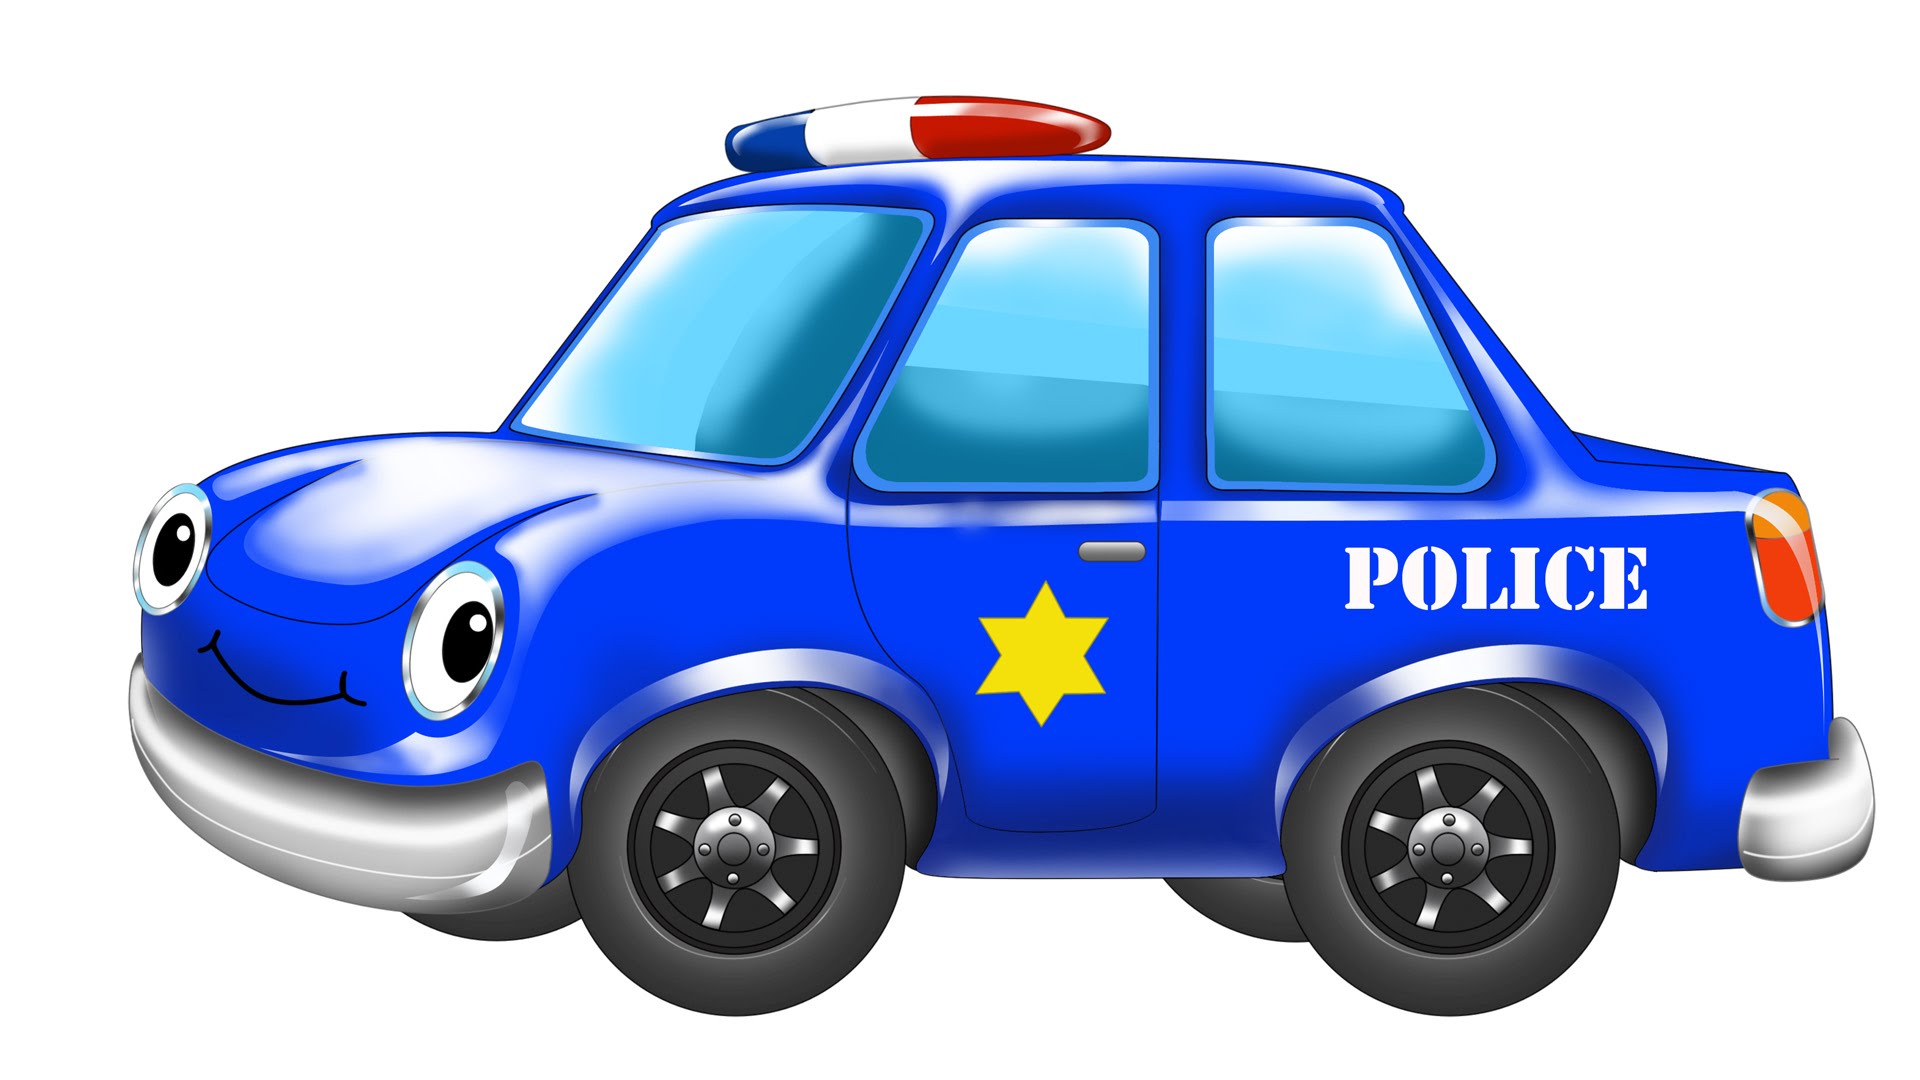 police car clipart images - photo #48